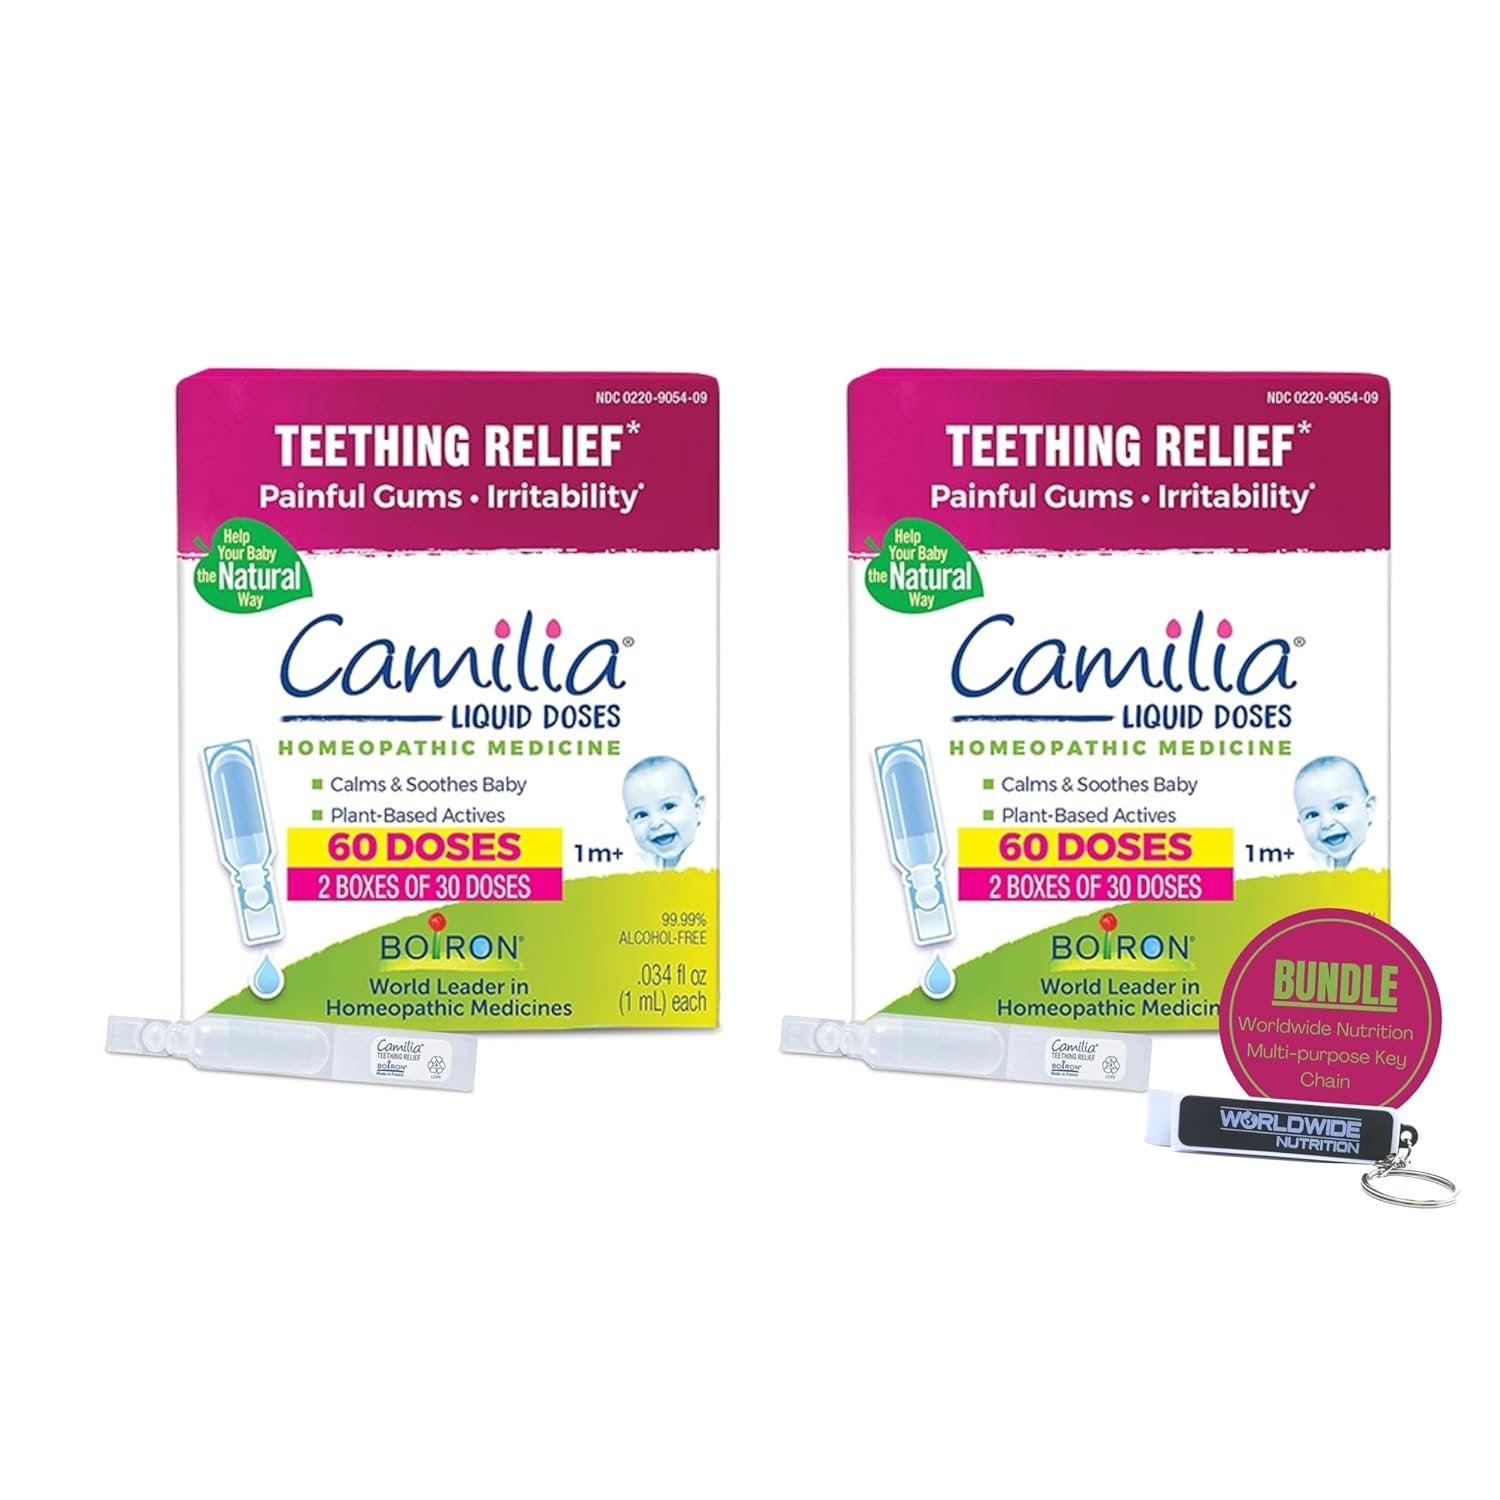 Boiron Camilia Liquid Doses - Homeopathic Medicine (1m+) - Teething Relief - Painful Gums - Irritability - 60 Count - Pack of 2 - with Multi-Purpose Keychain